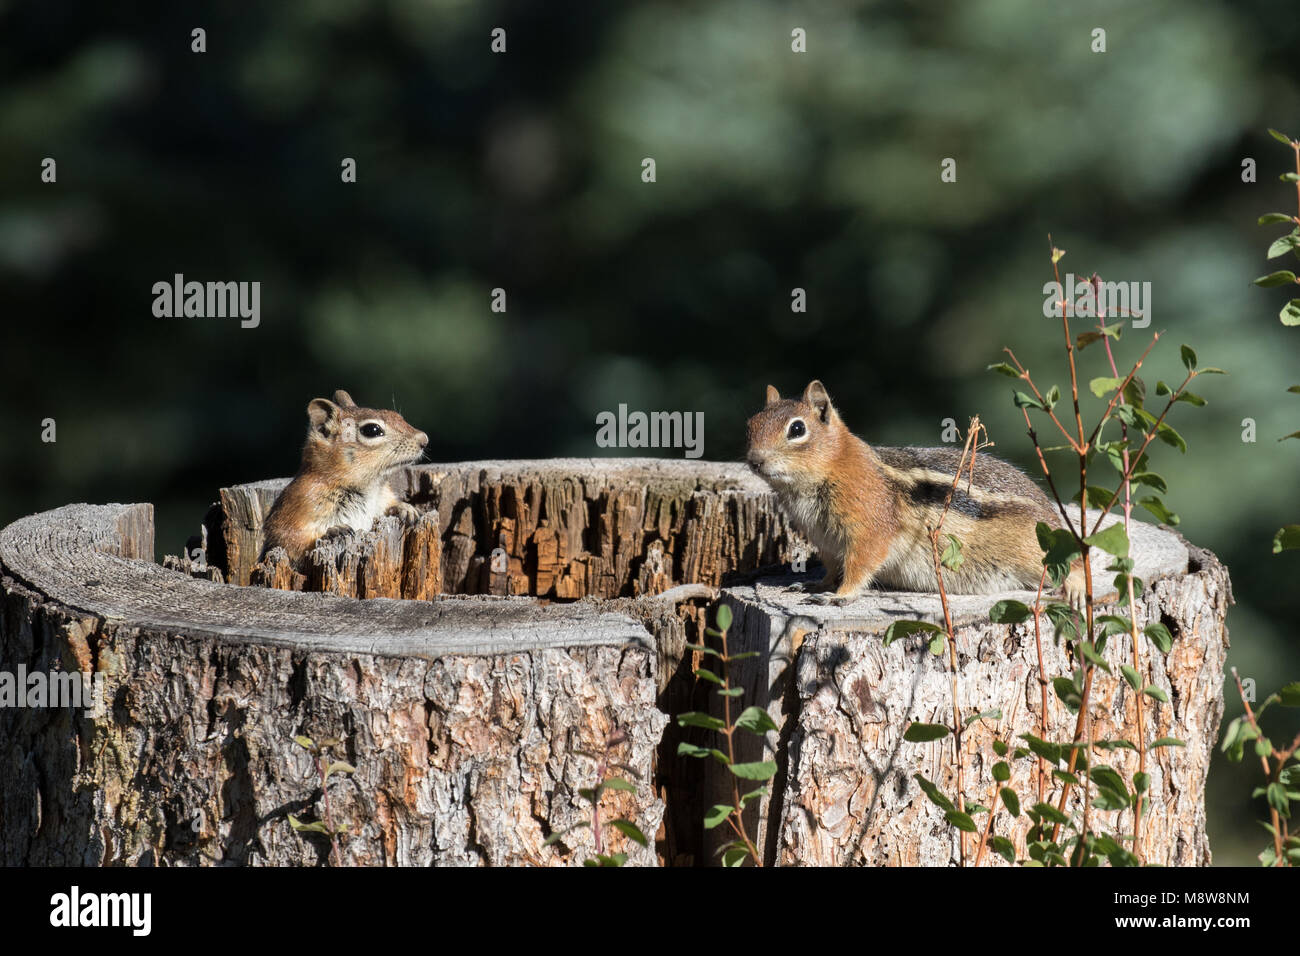 A pair of golden-mantled ground squirrels on stump Stock Photo